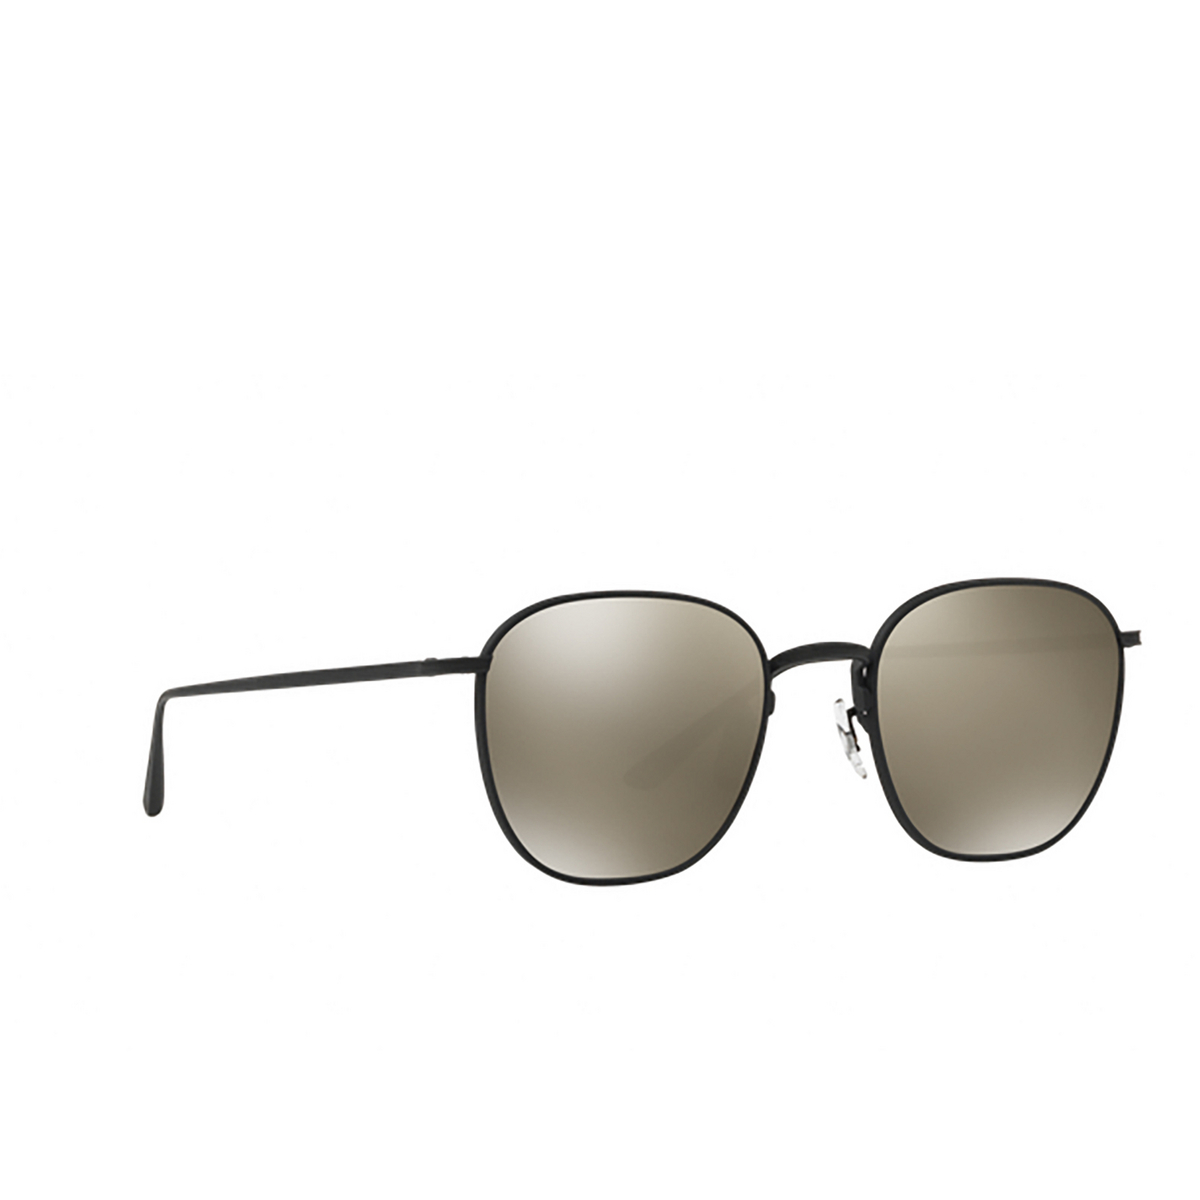 Oliver Peoples BOARD MEETING 2 Sunglasses 501739 Matte Black - three-quarters view